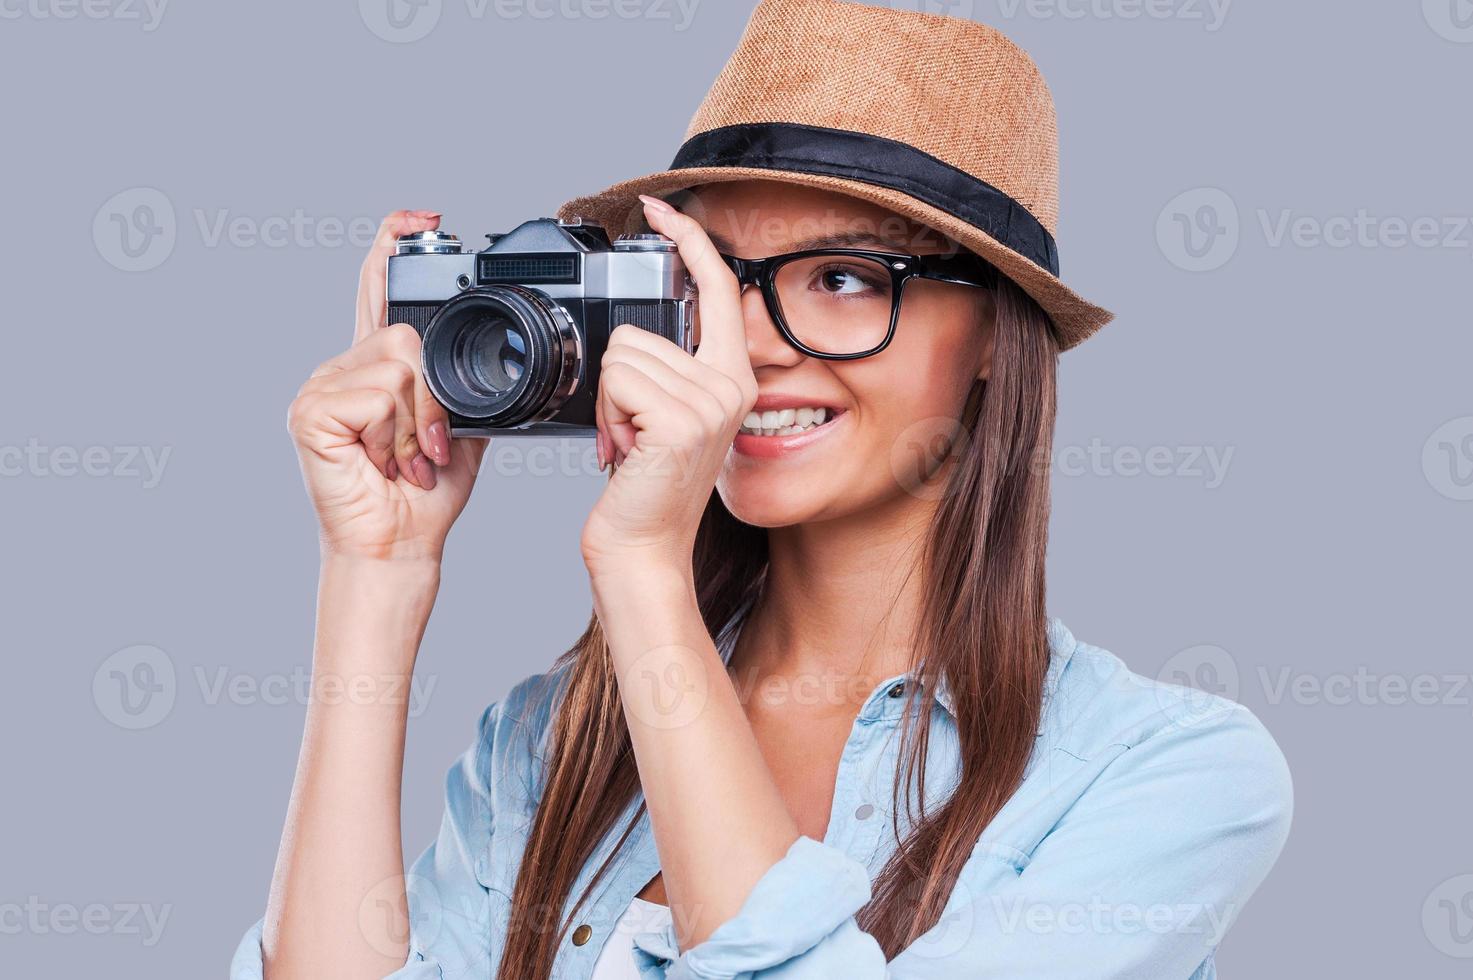 Be creative Creative young girl taking a photograph and smiling while standing against grey background photo